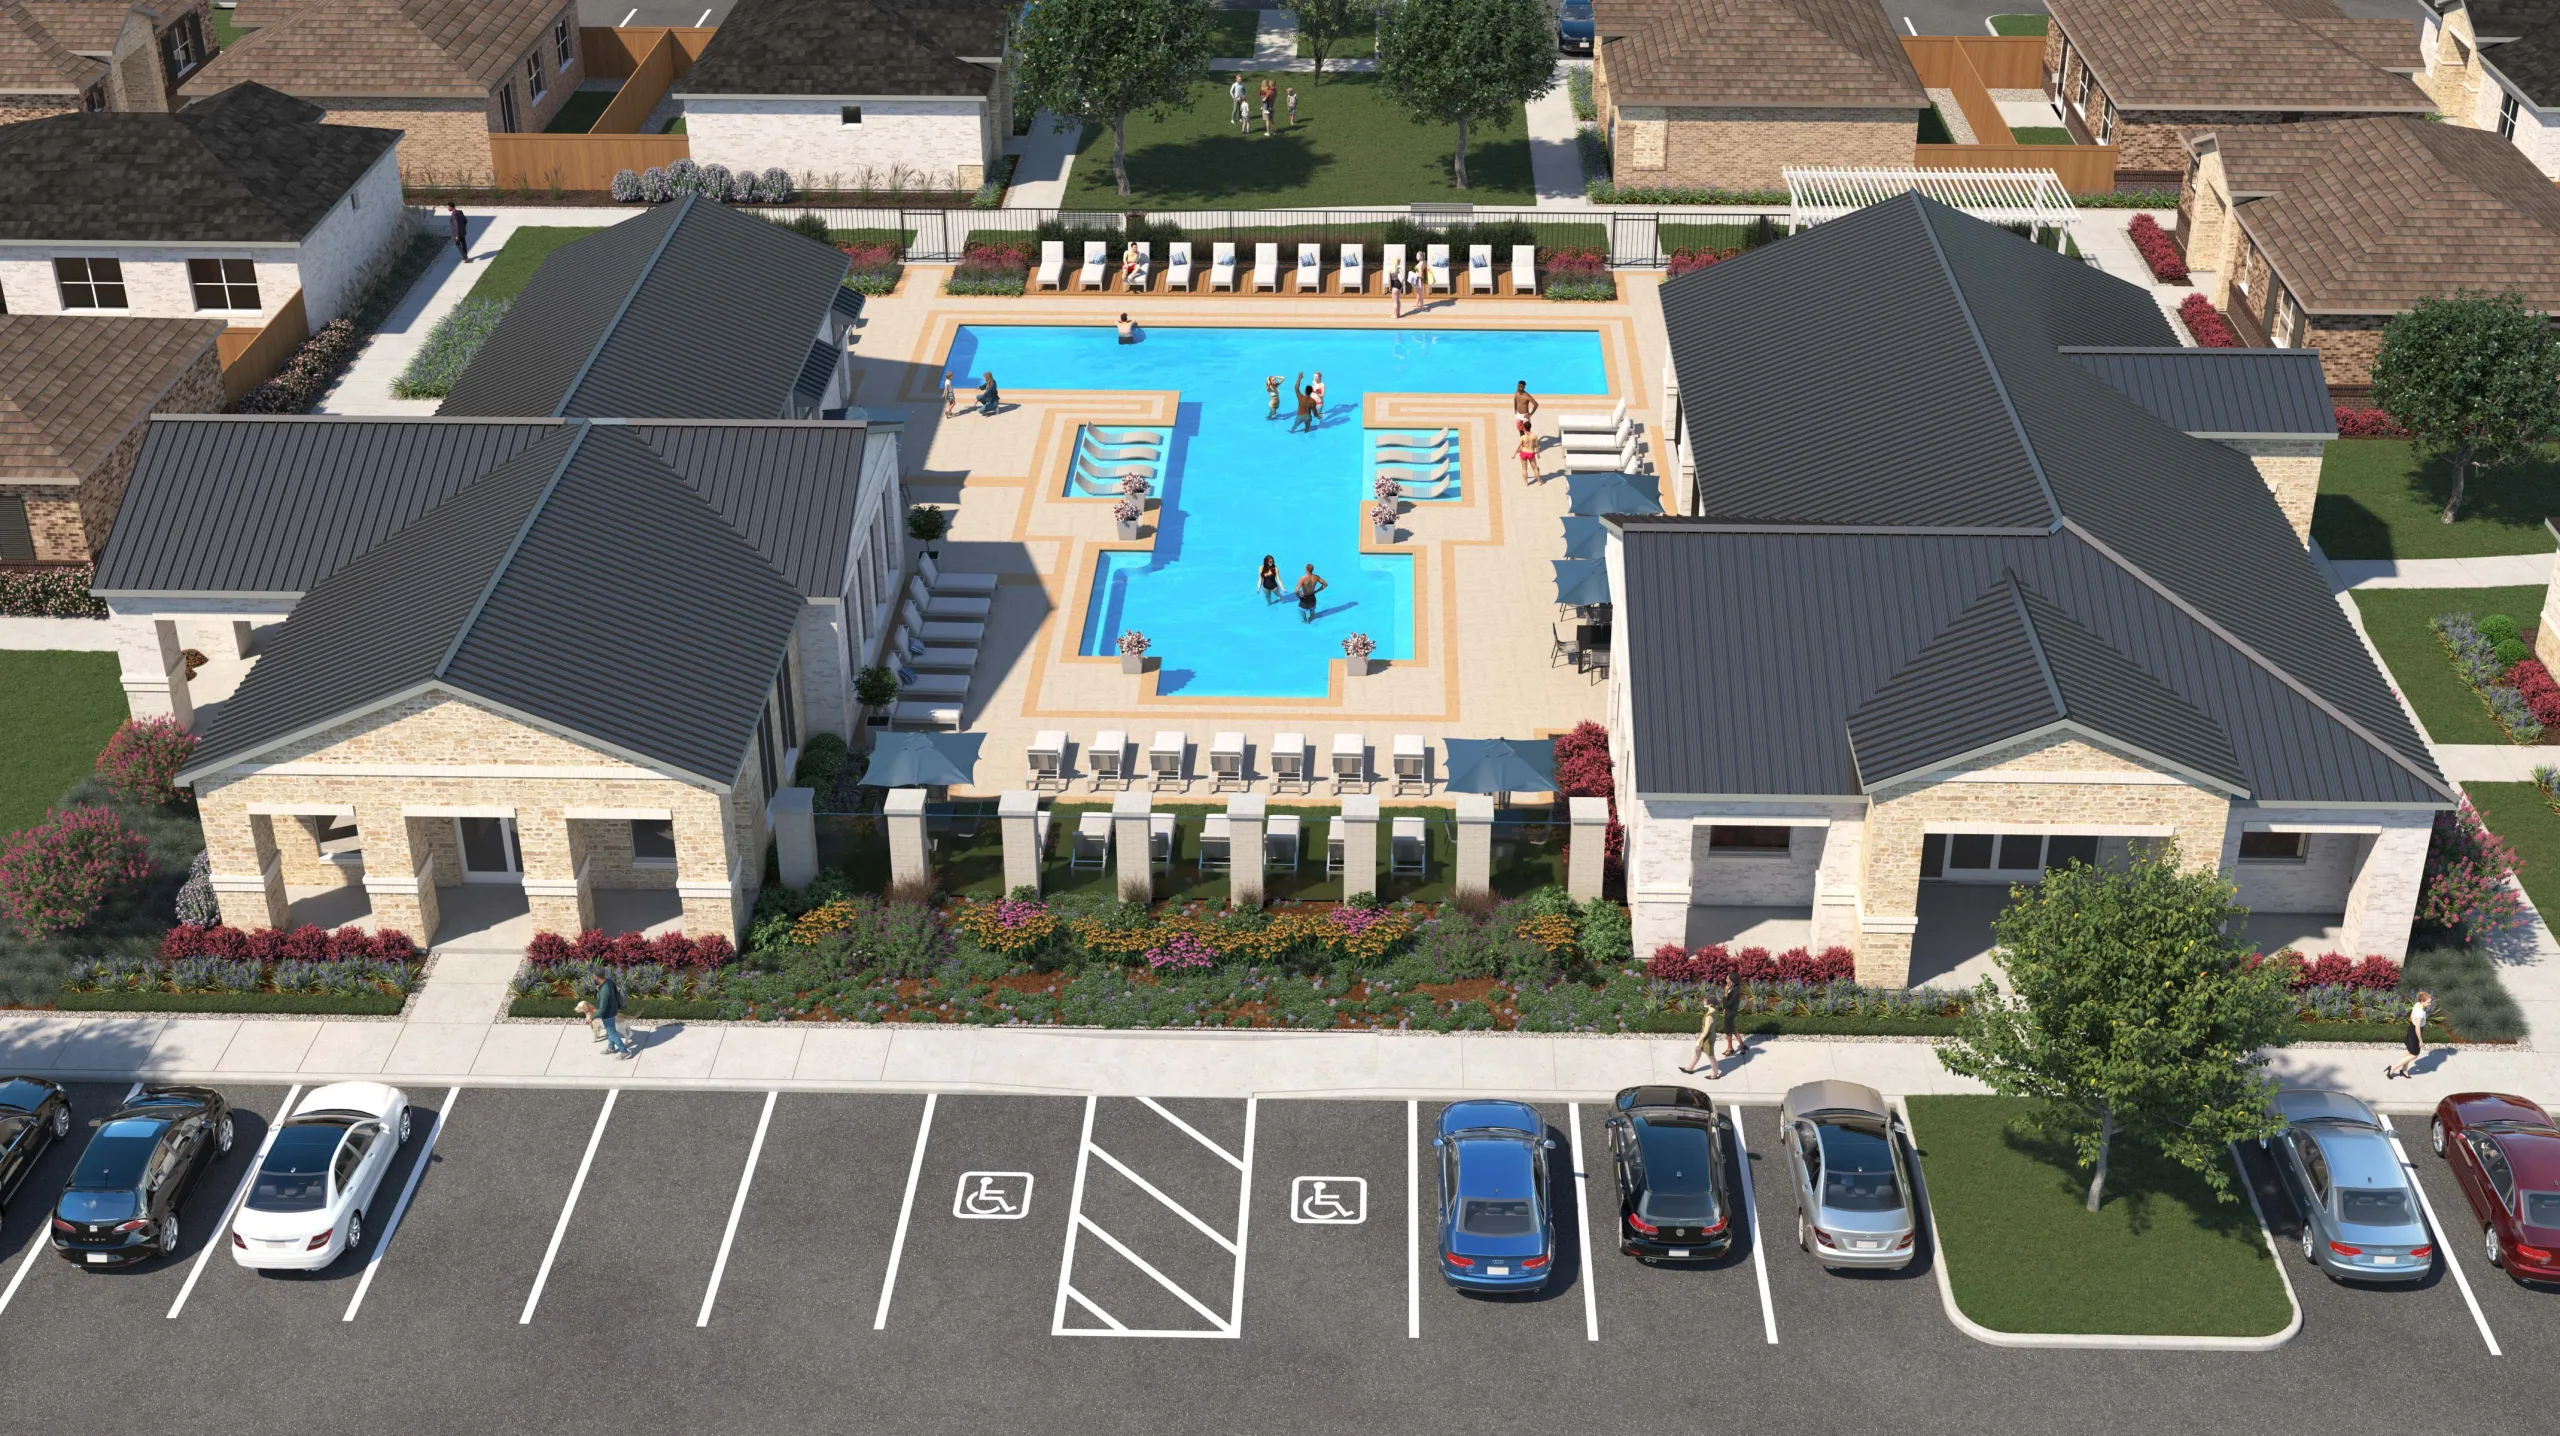 One-story homes for rent with private backyards near Dallas, TX. Rendering of community center arial view of pool, homes, and fitness center building.